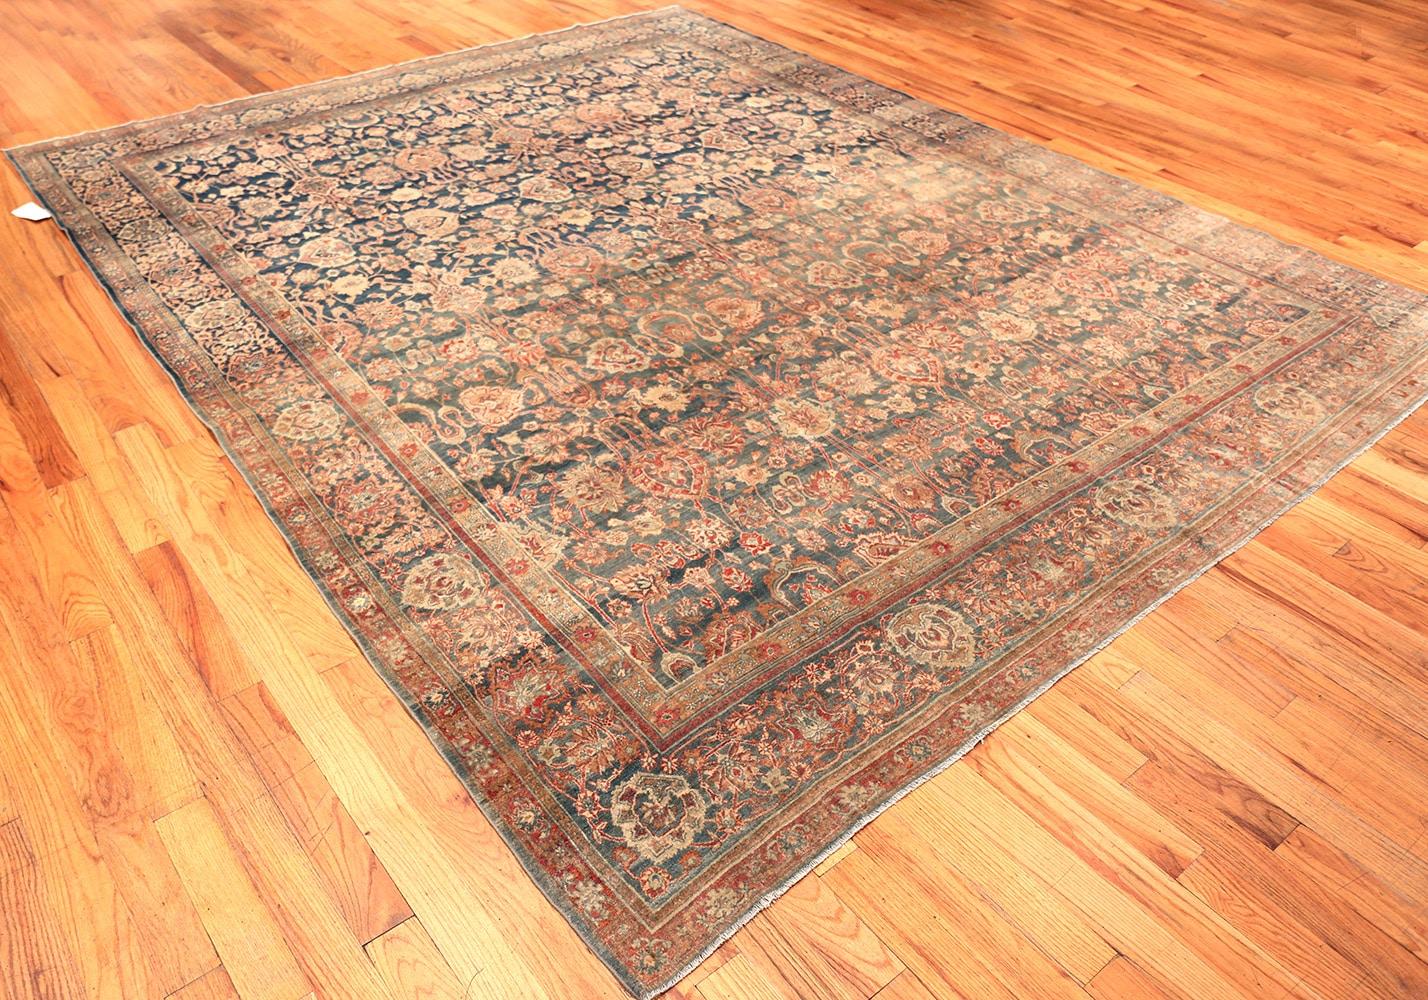 Wool Antique Persian Kerman Rug. Size: 9 ft 11 in x 11 ft 8 in For Sale